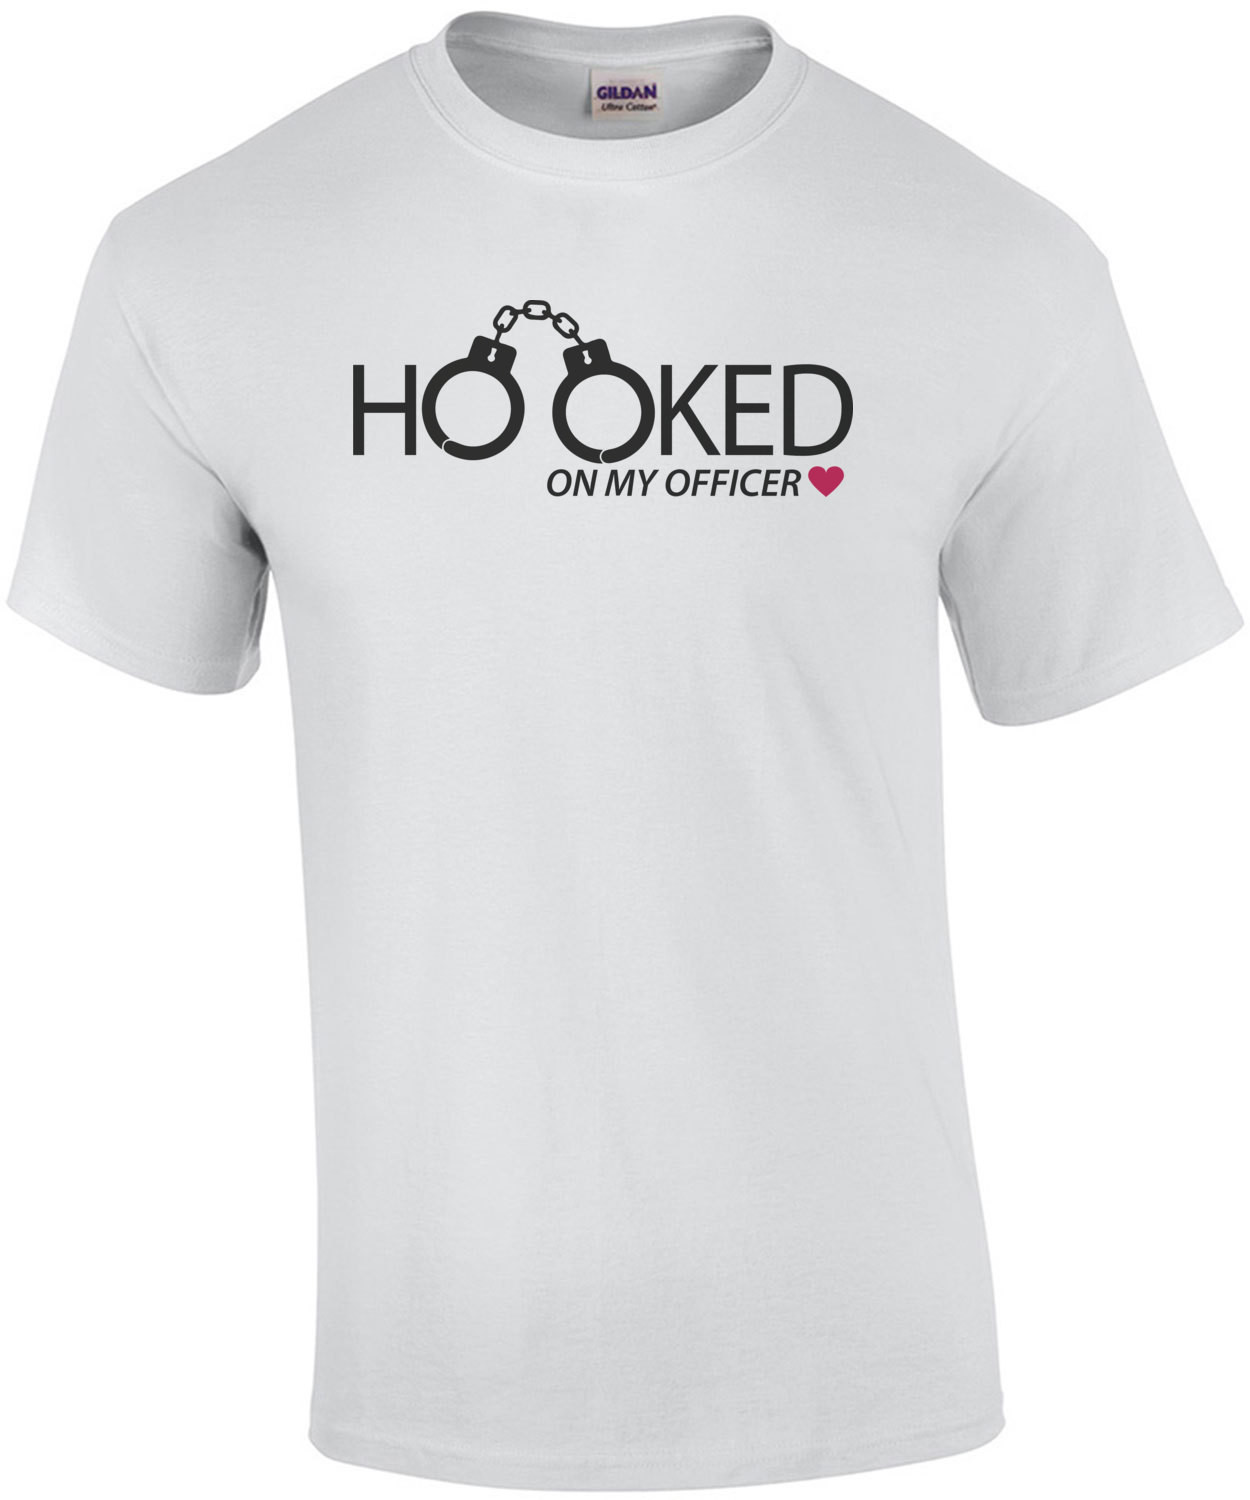 Hooked on my officer - pro cop t-shirt